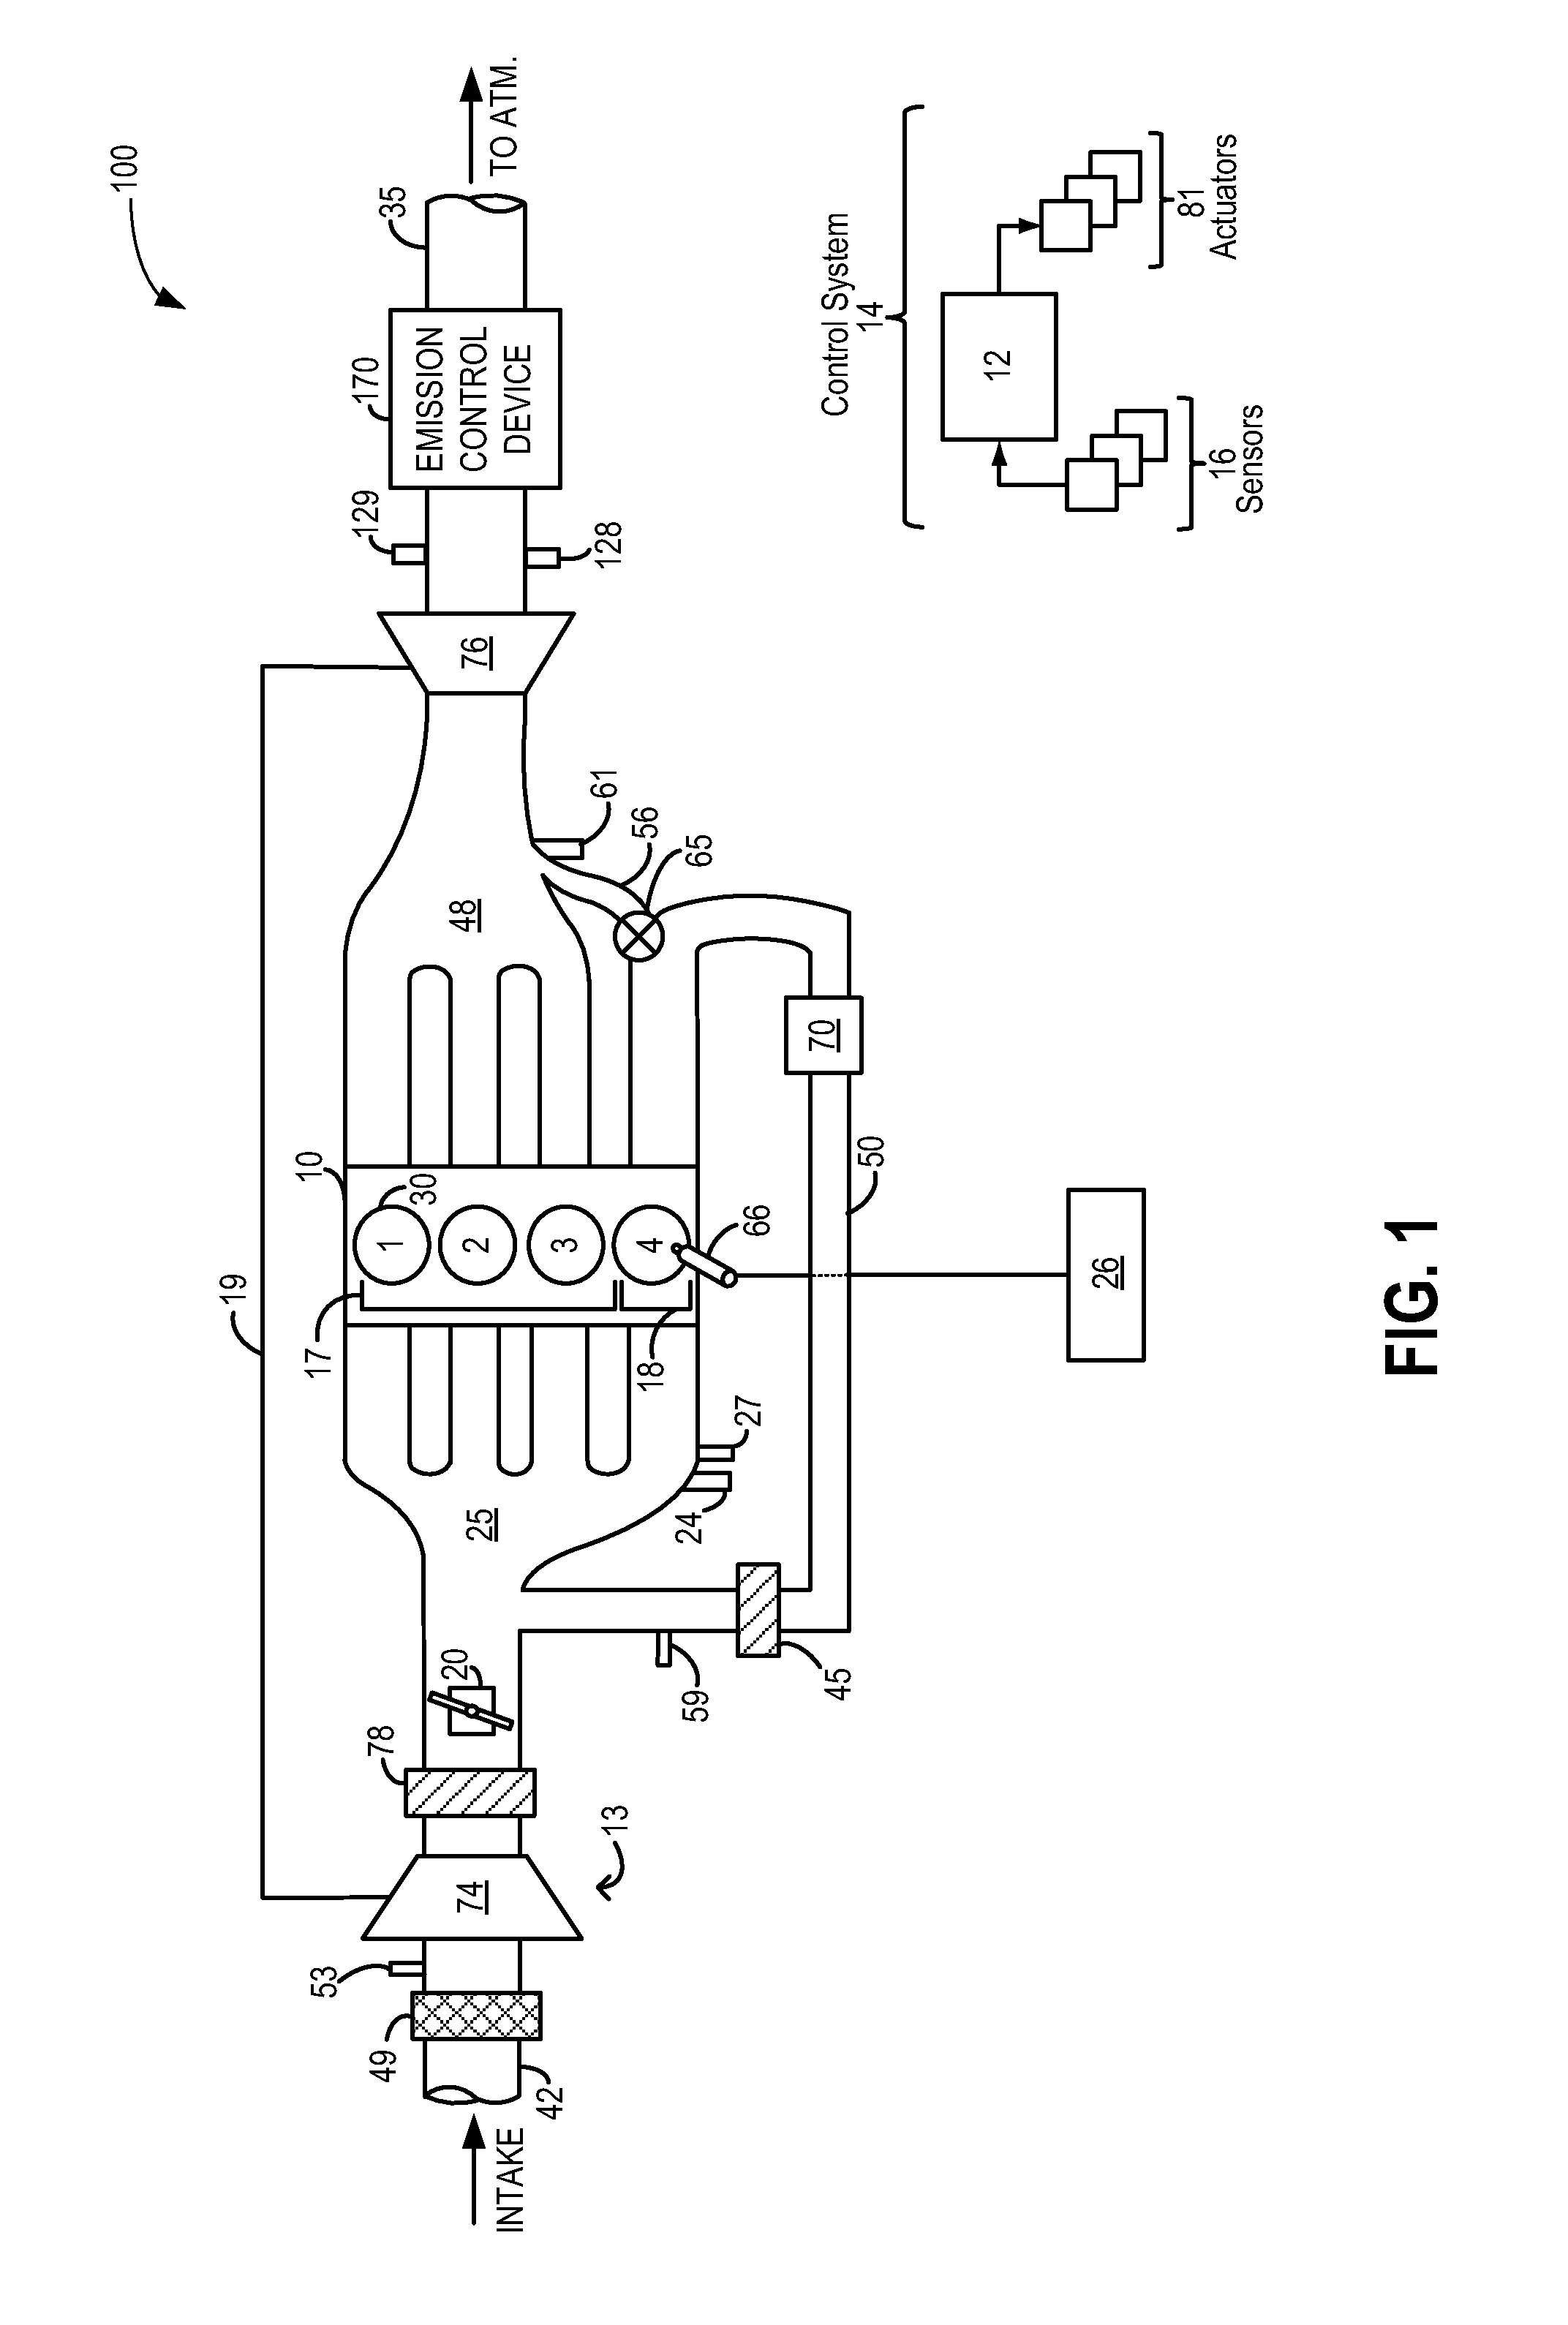 Systems and methods for stopping and starting an engine with dedicated egr